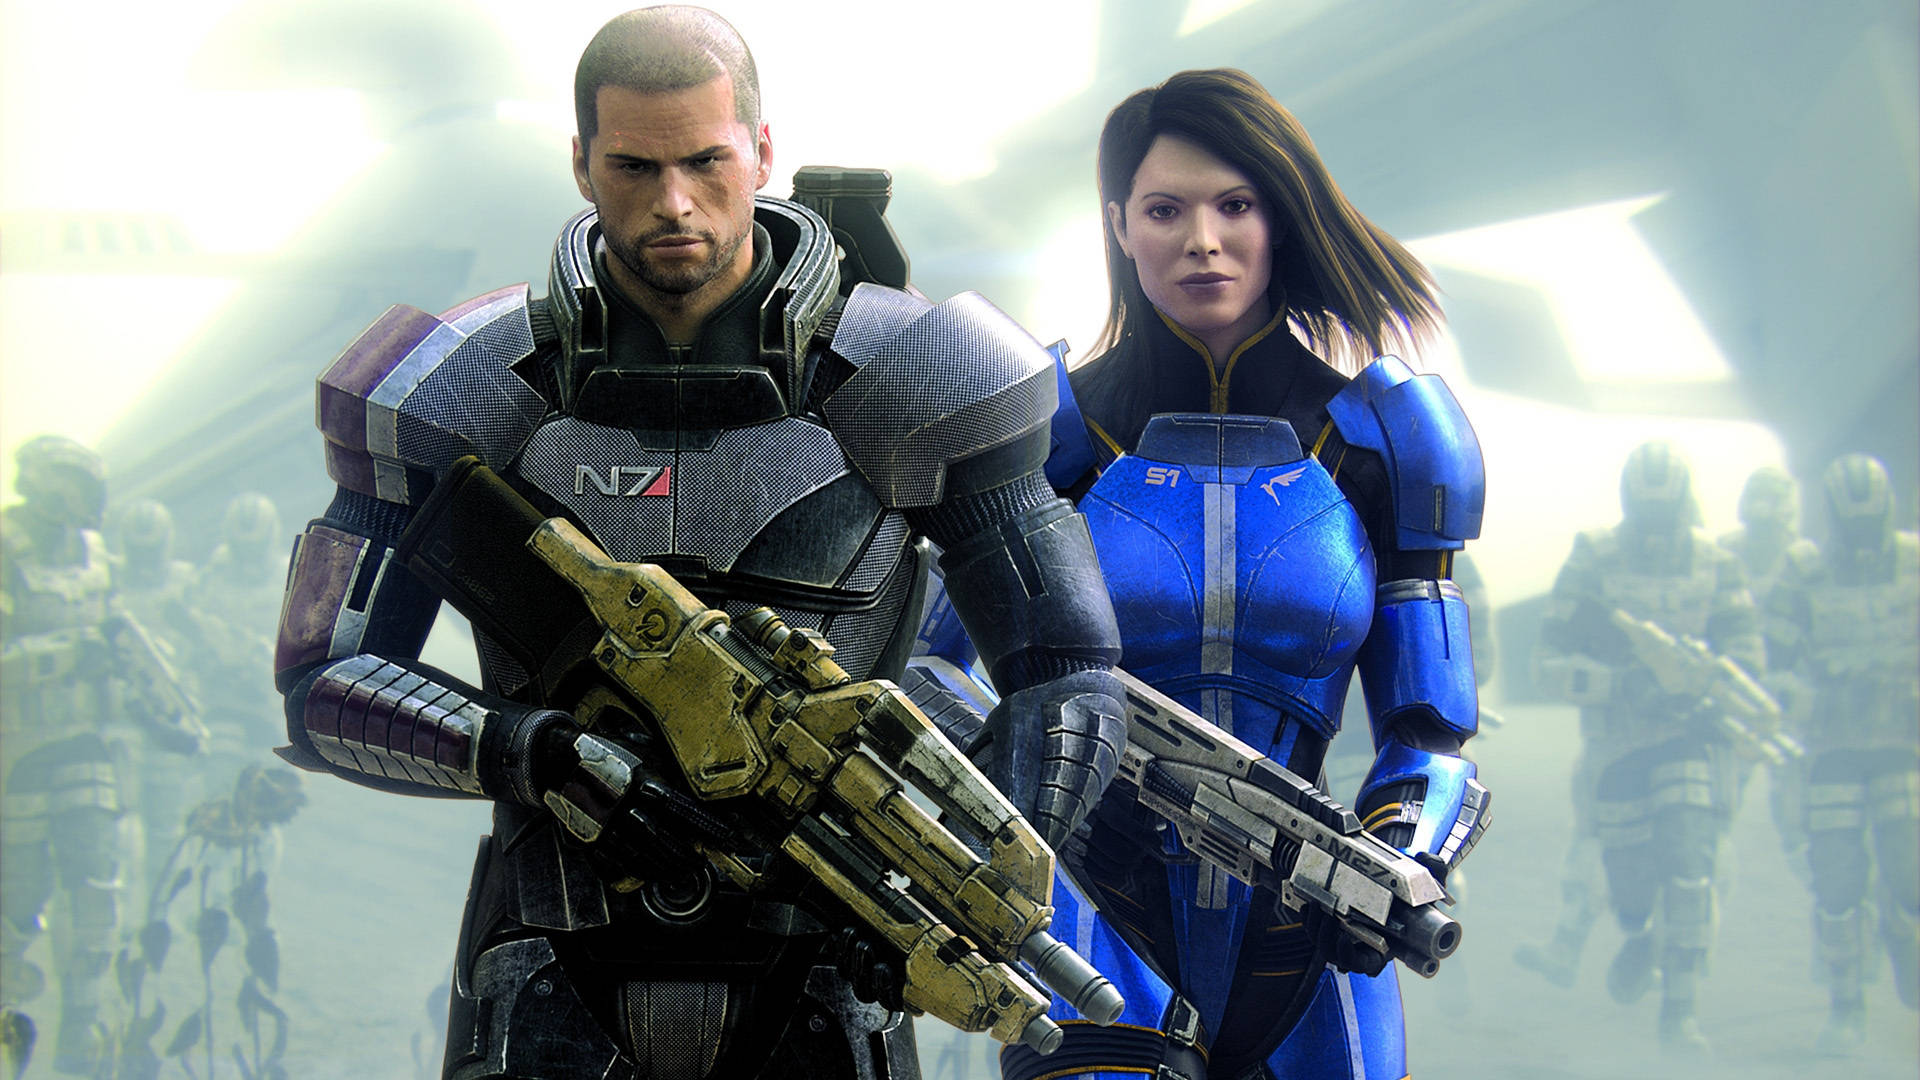 Commander Shepard And Ashley Williams In Mass Effect 3 Wallpaper